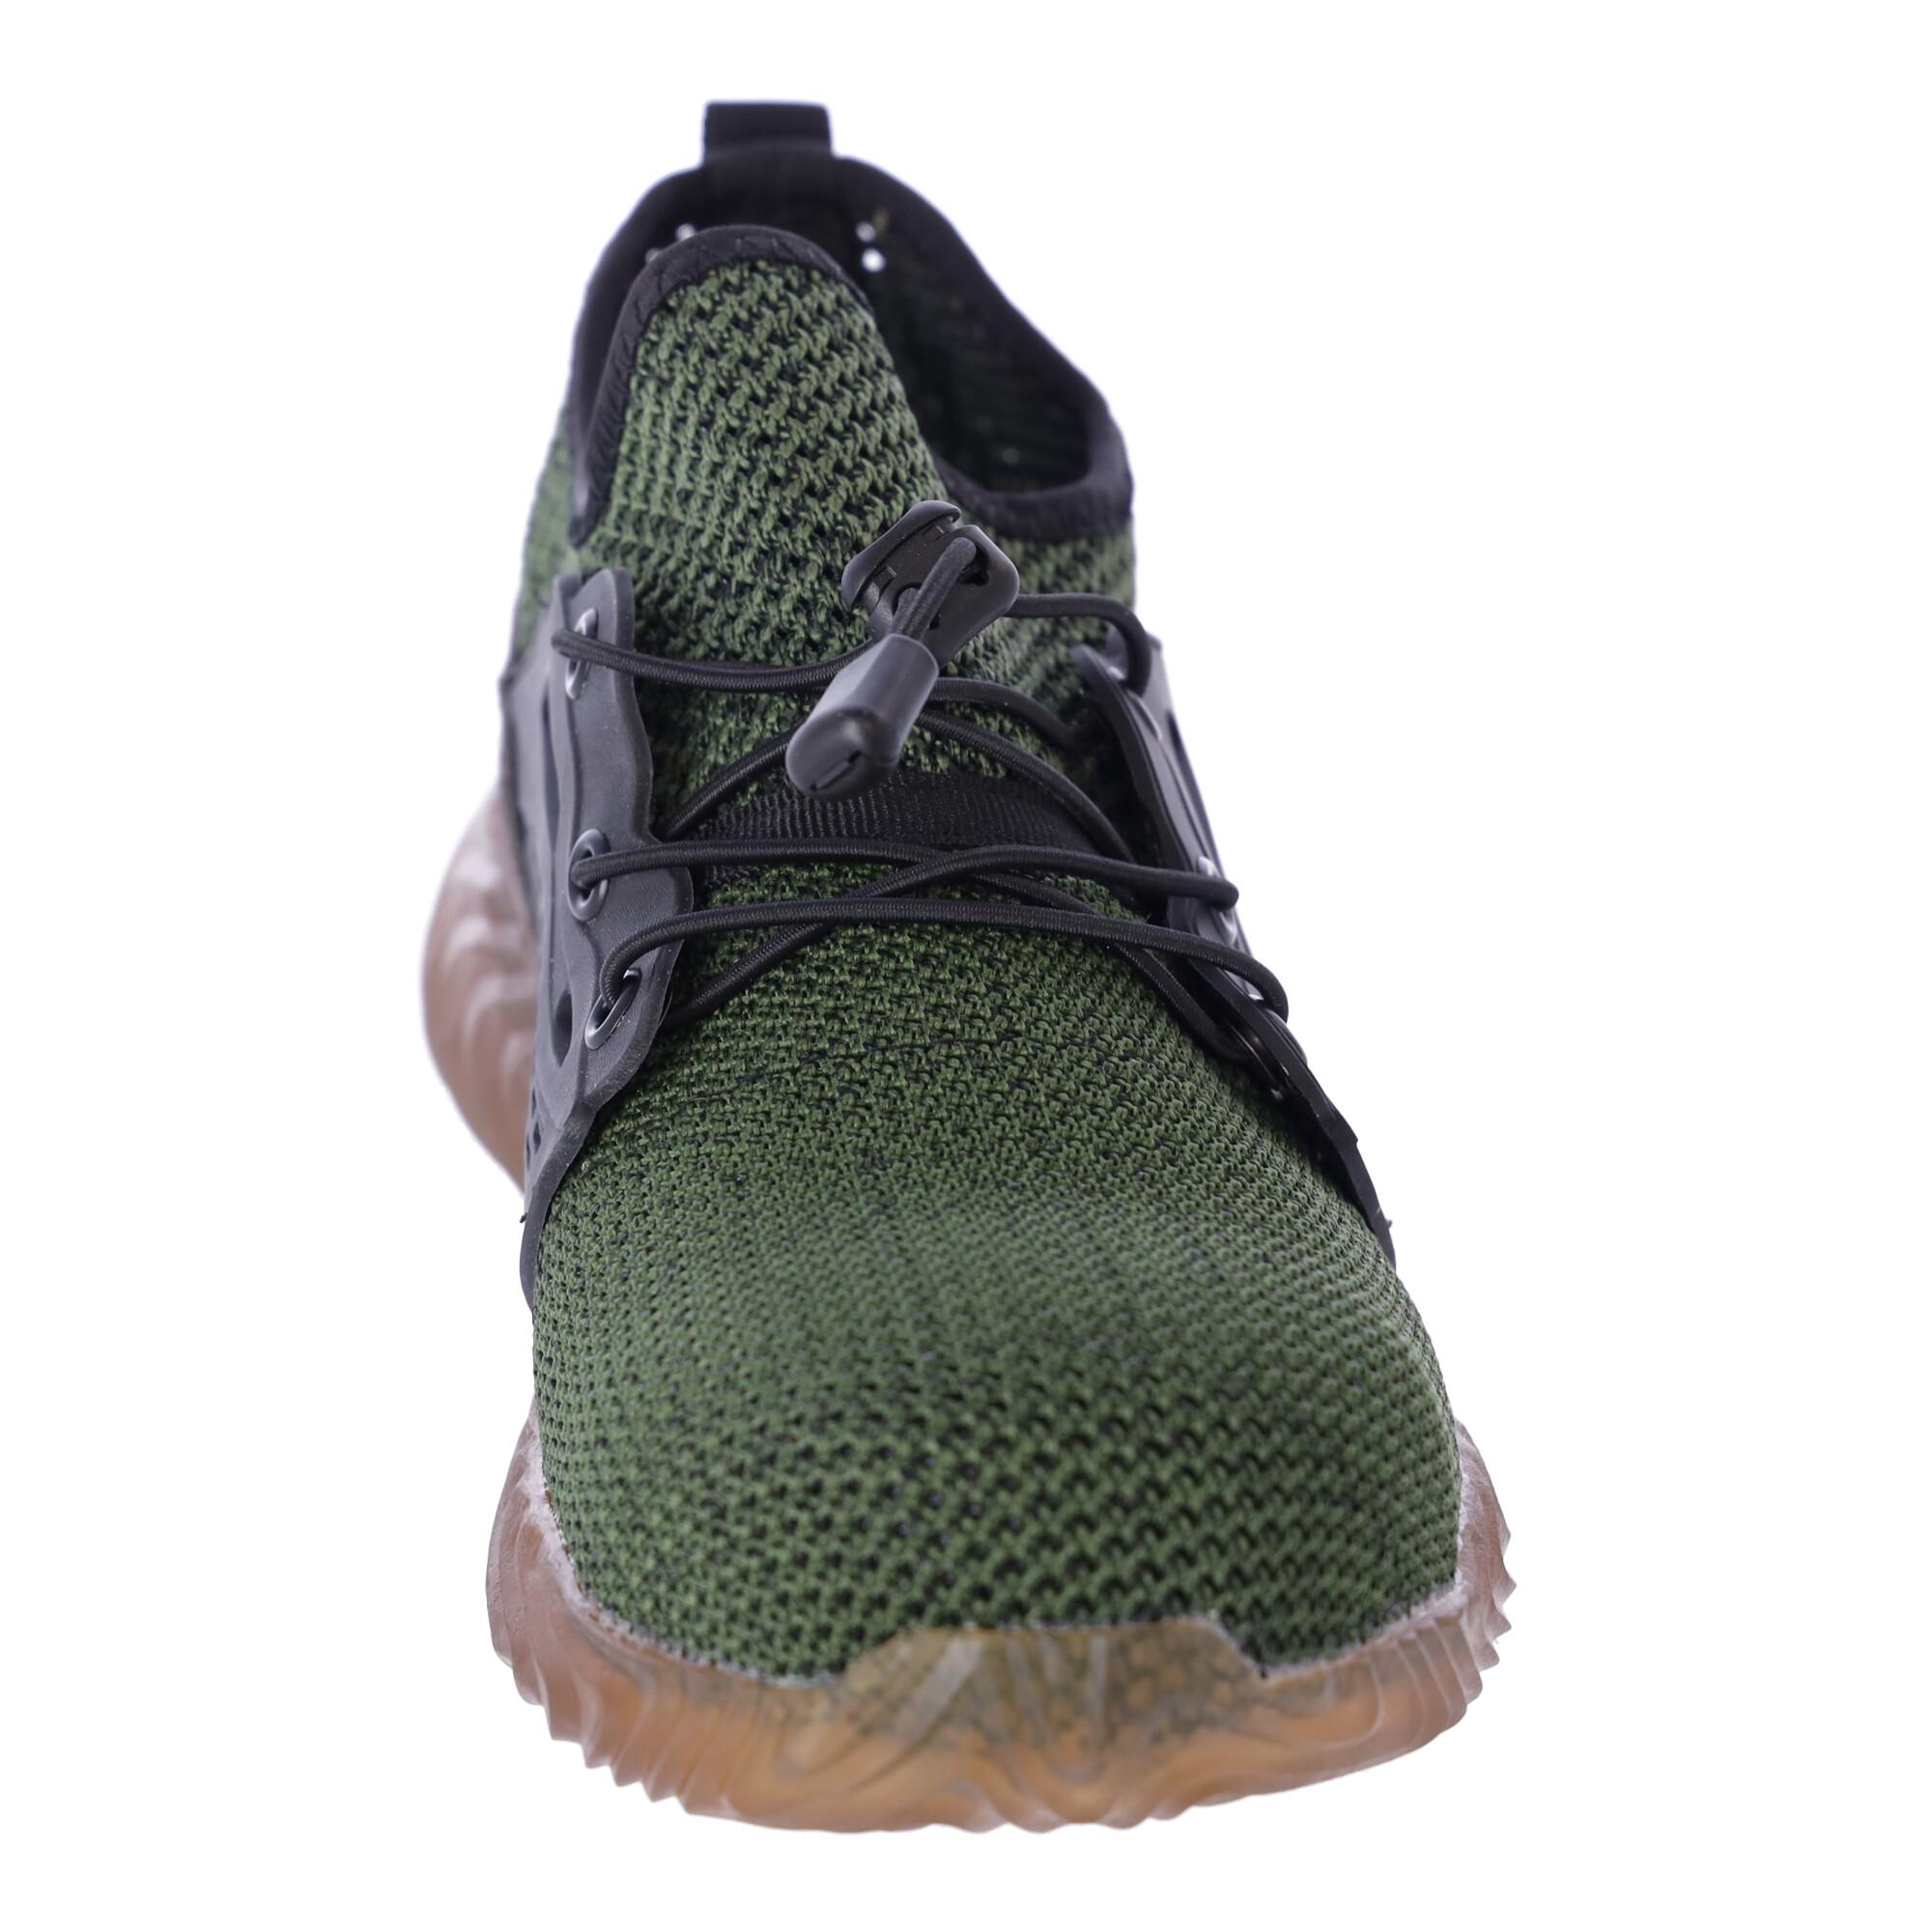 Work safety shoes Soft "46"- green